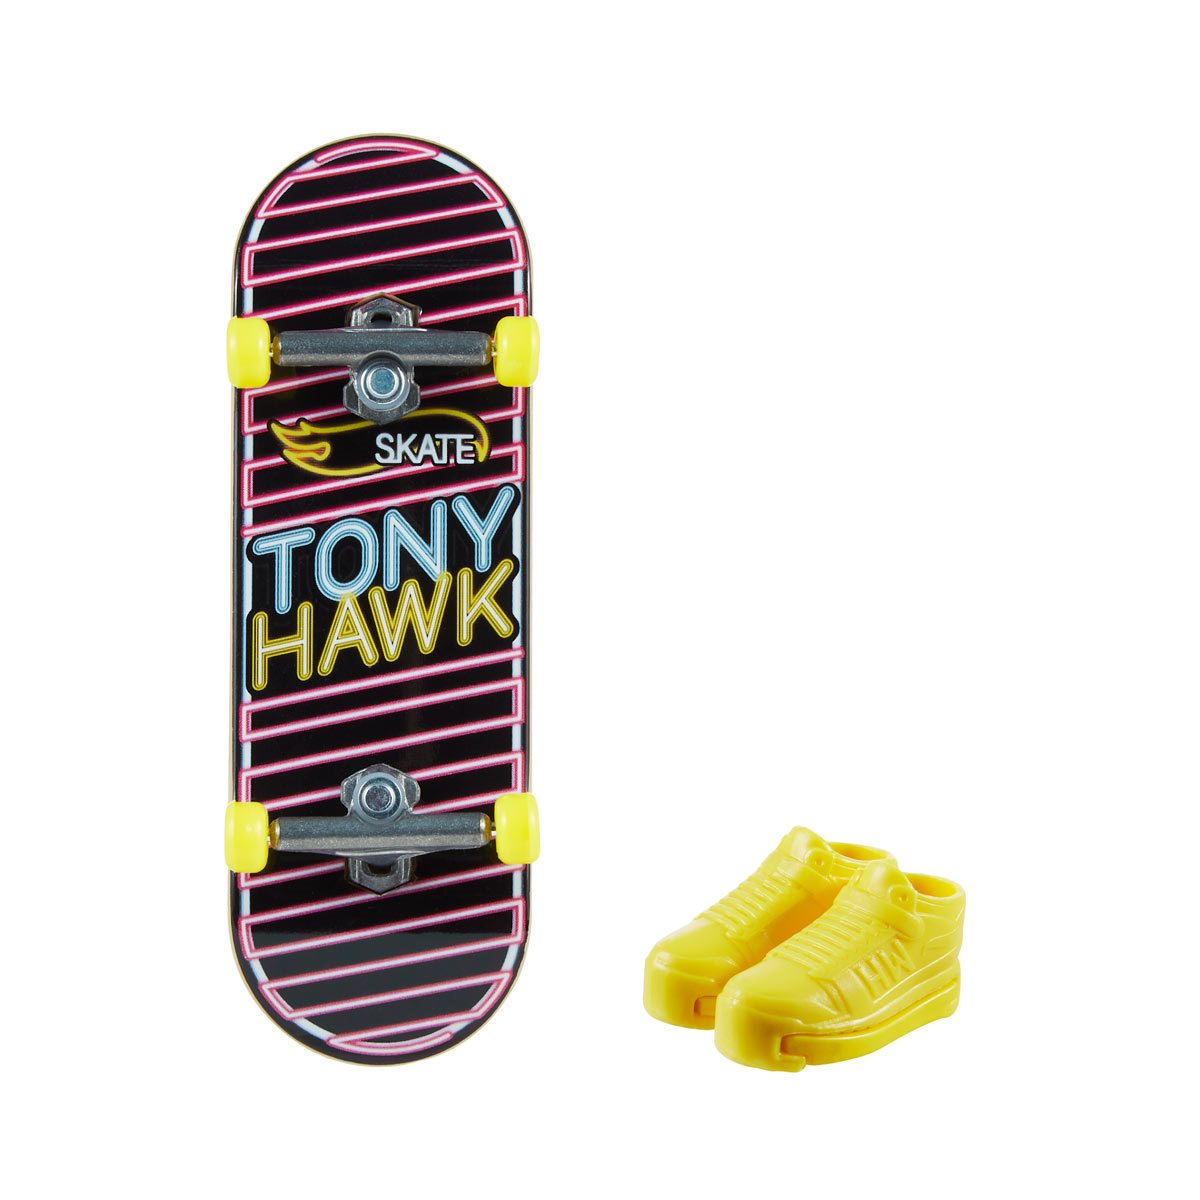 Tony Hawk and Hot Wheels Are Teaming up to Take on Tech Deck